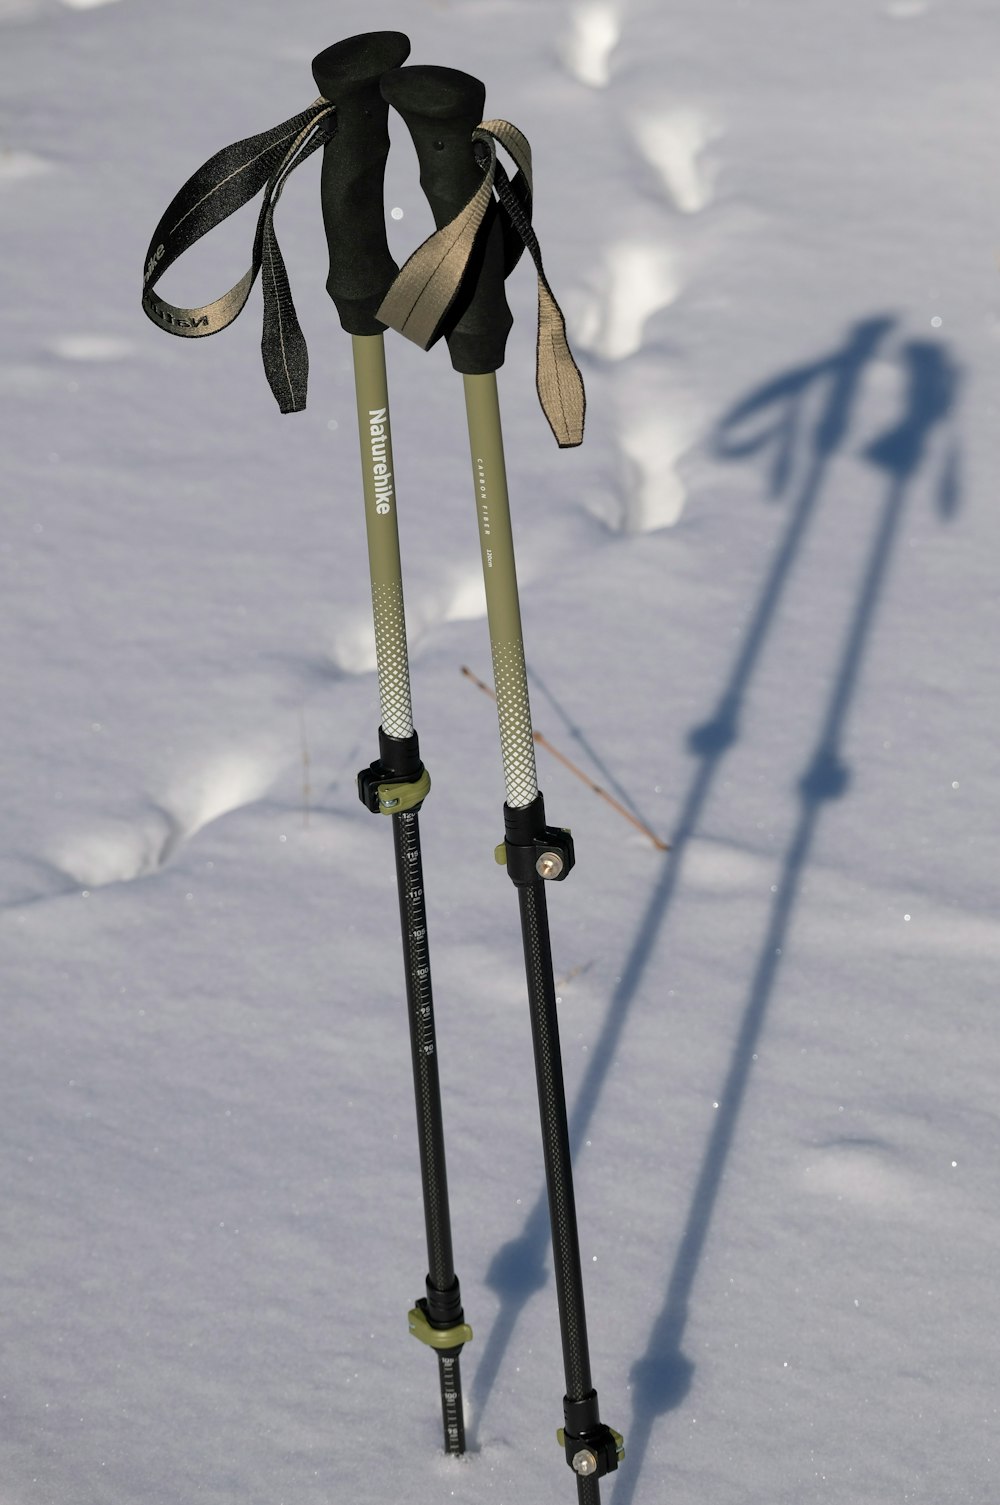 two ski poles sticking out of the snow